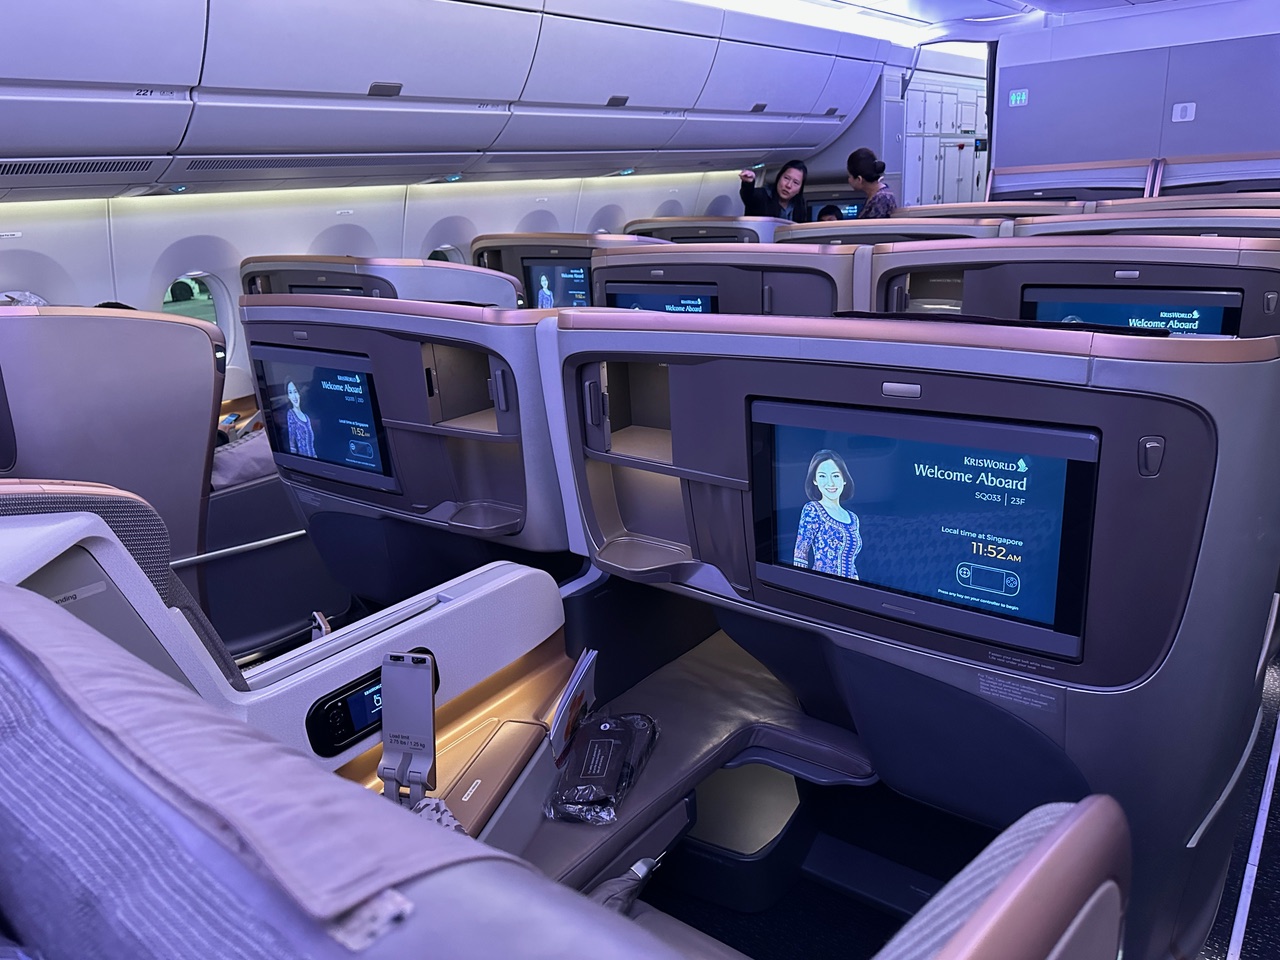 Business class seats on airplane